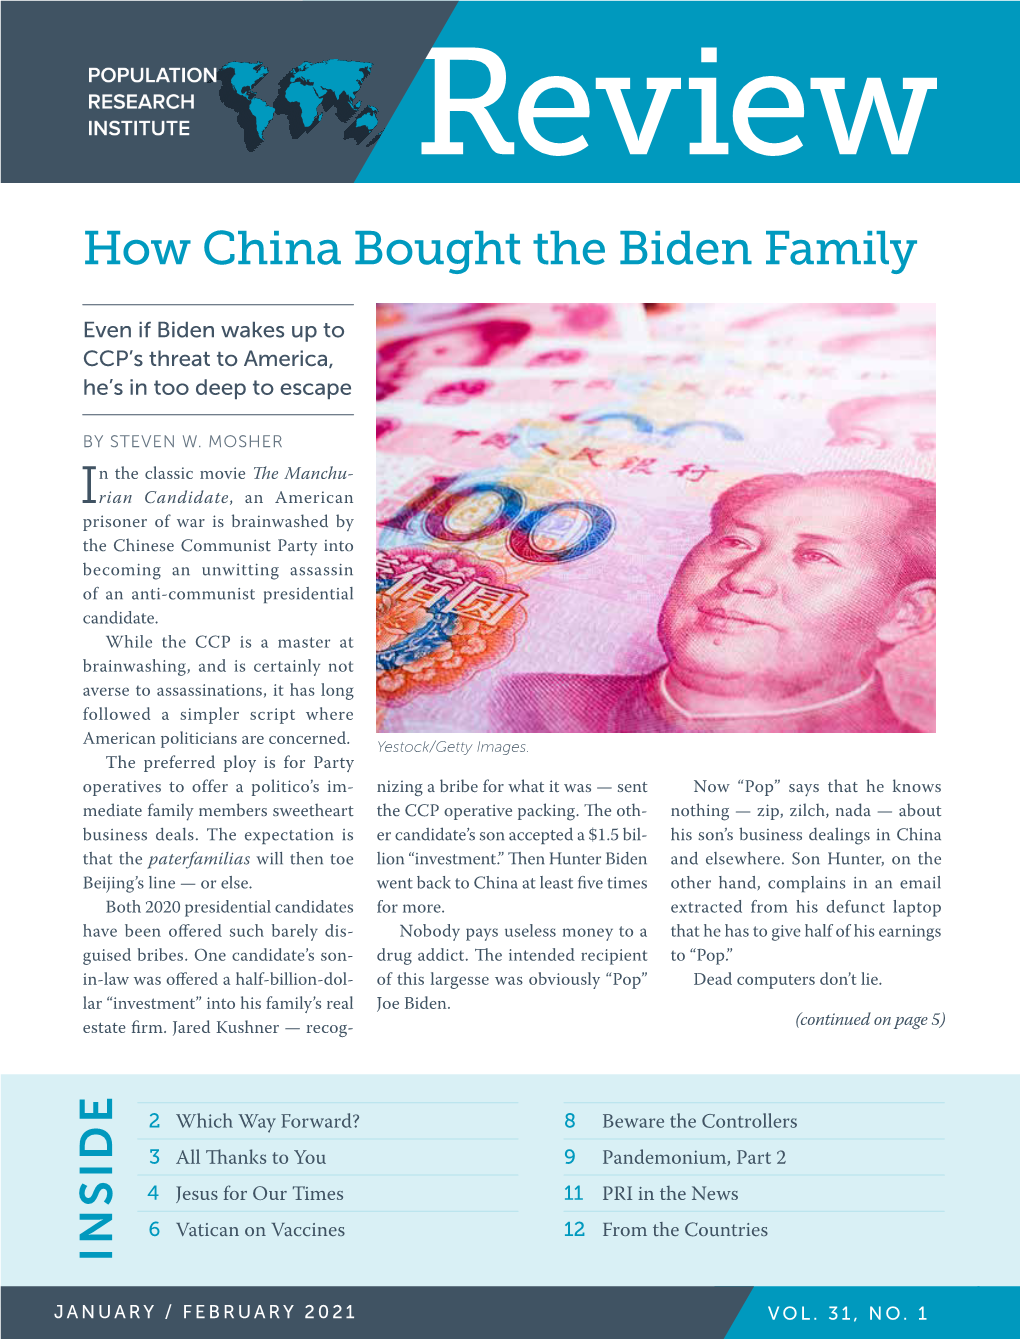 How China Bought the Biden Family